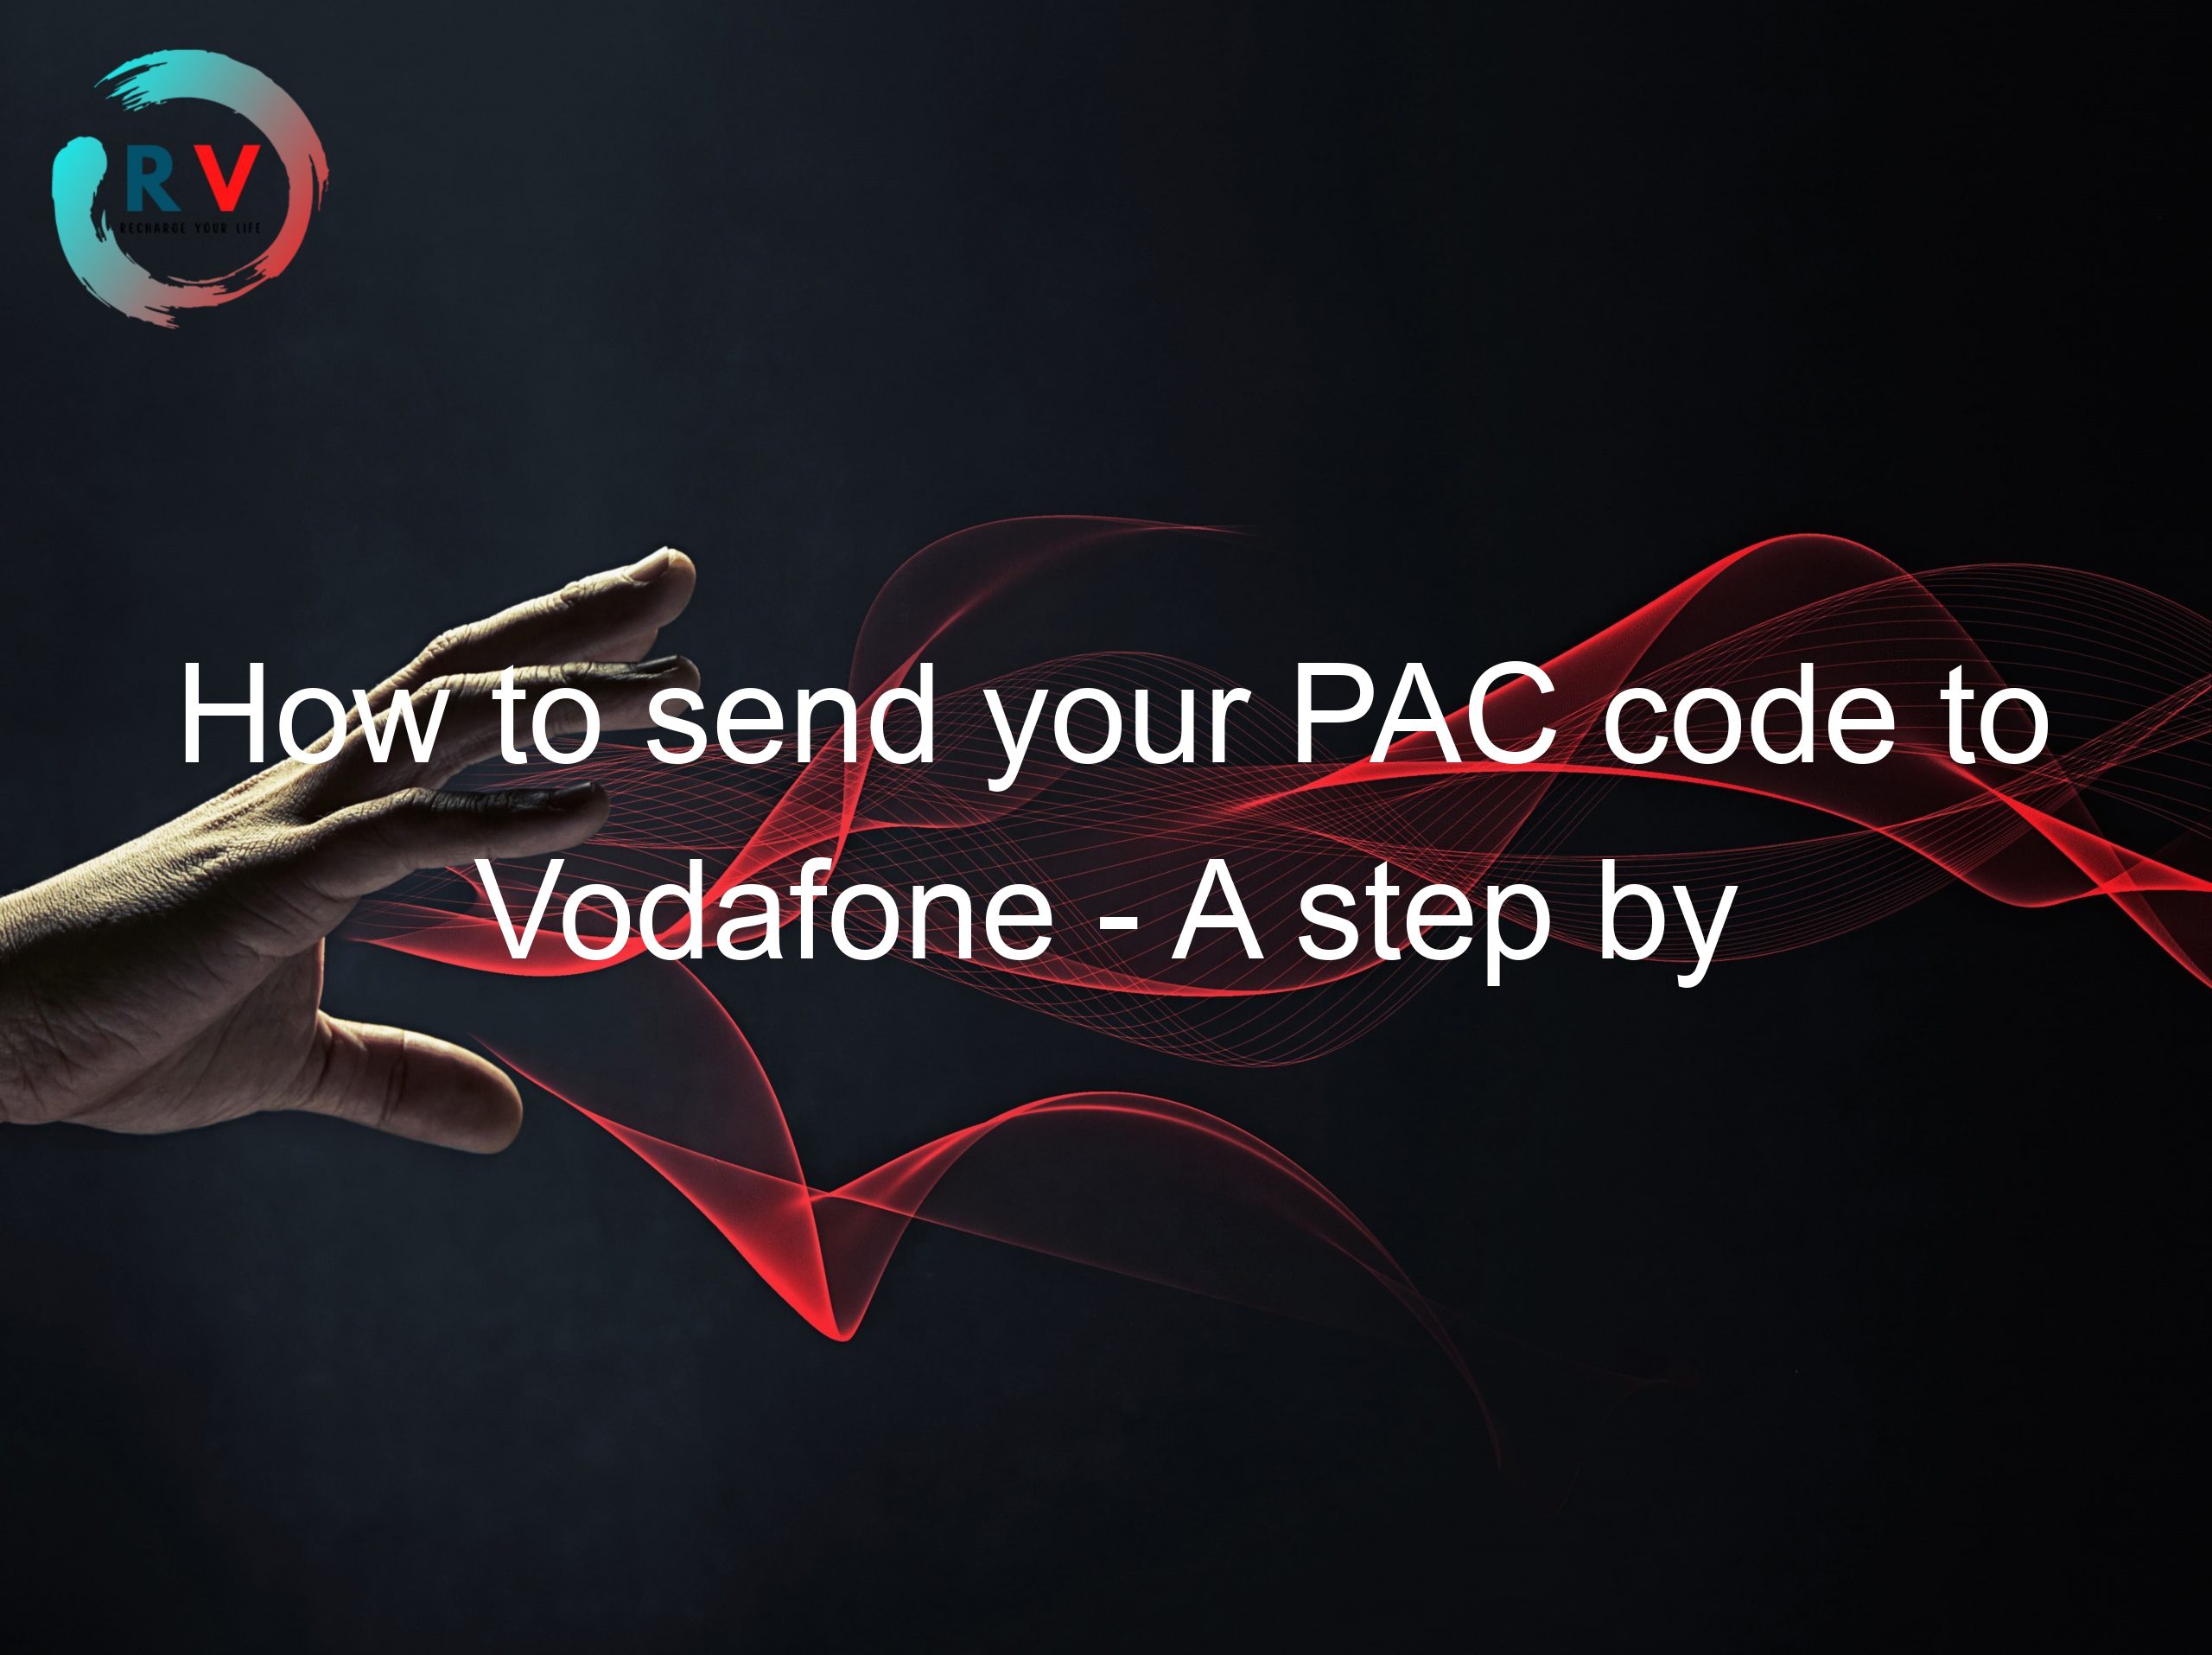 How to send your PAC code to Vodafone - A step by step guide